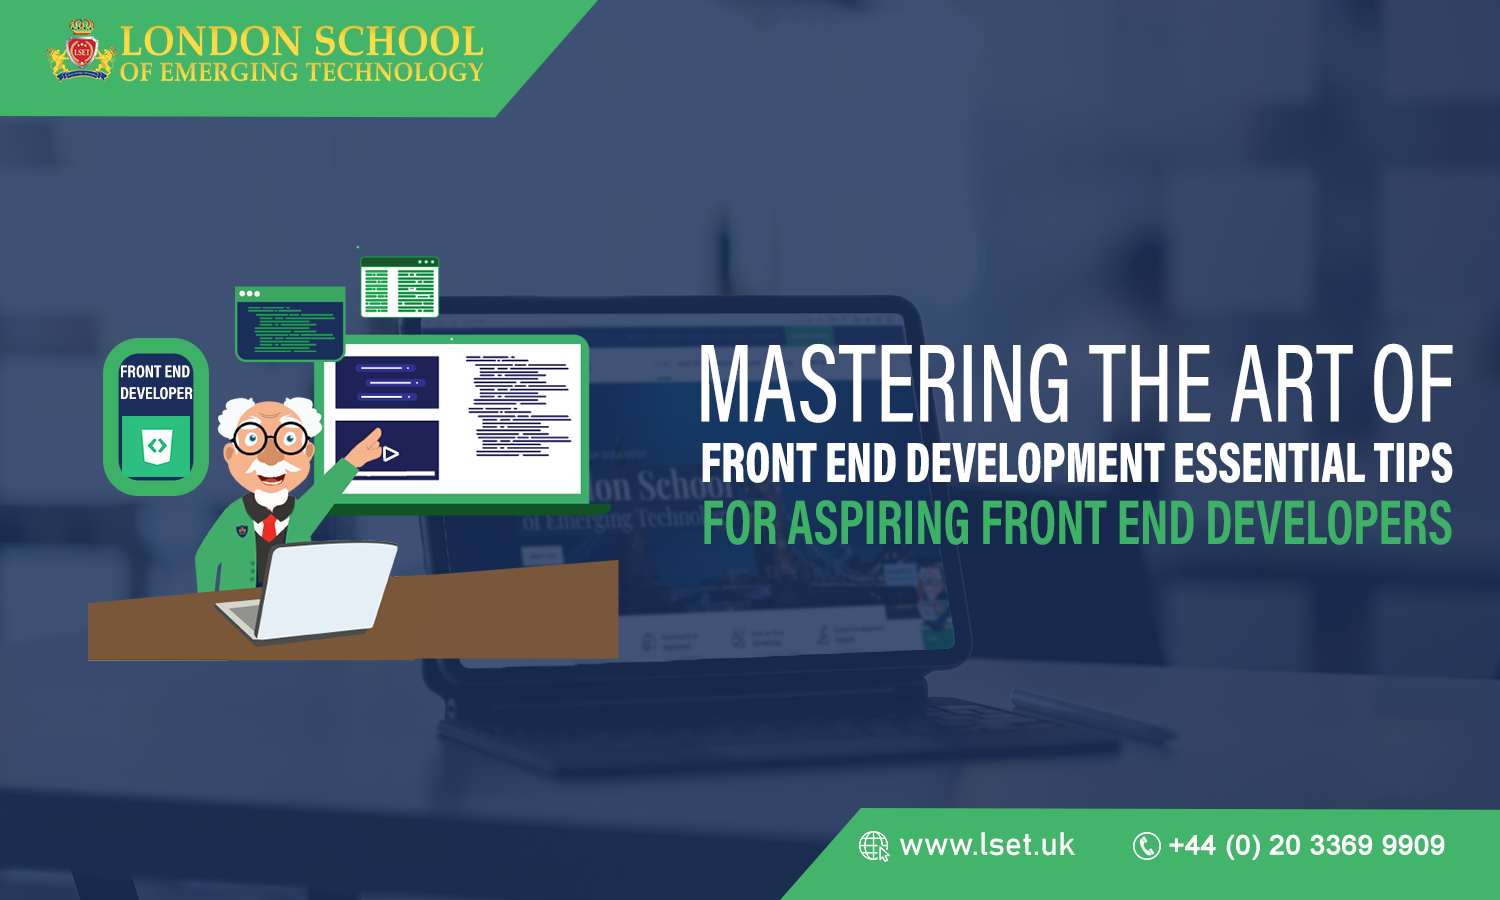 Mastering the Art of Front End Development Essential Tips for Aspiring Front End Developers